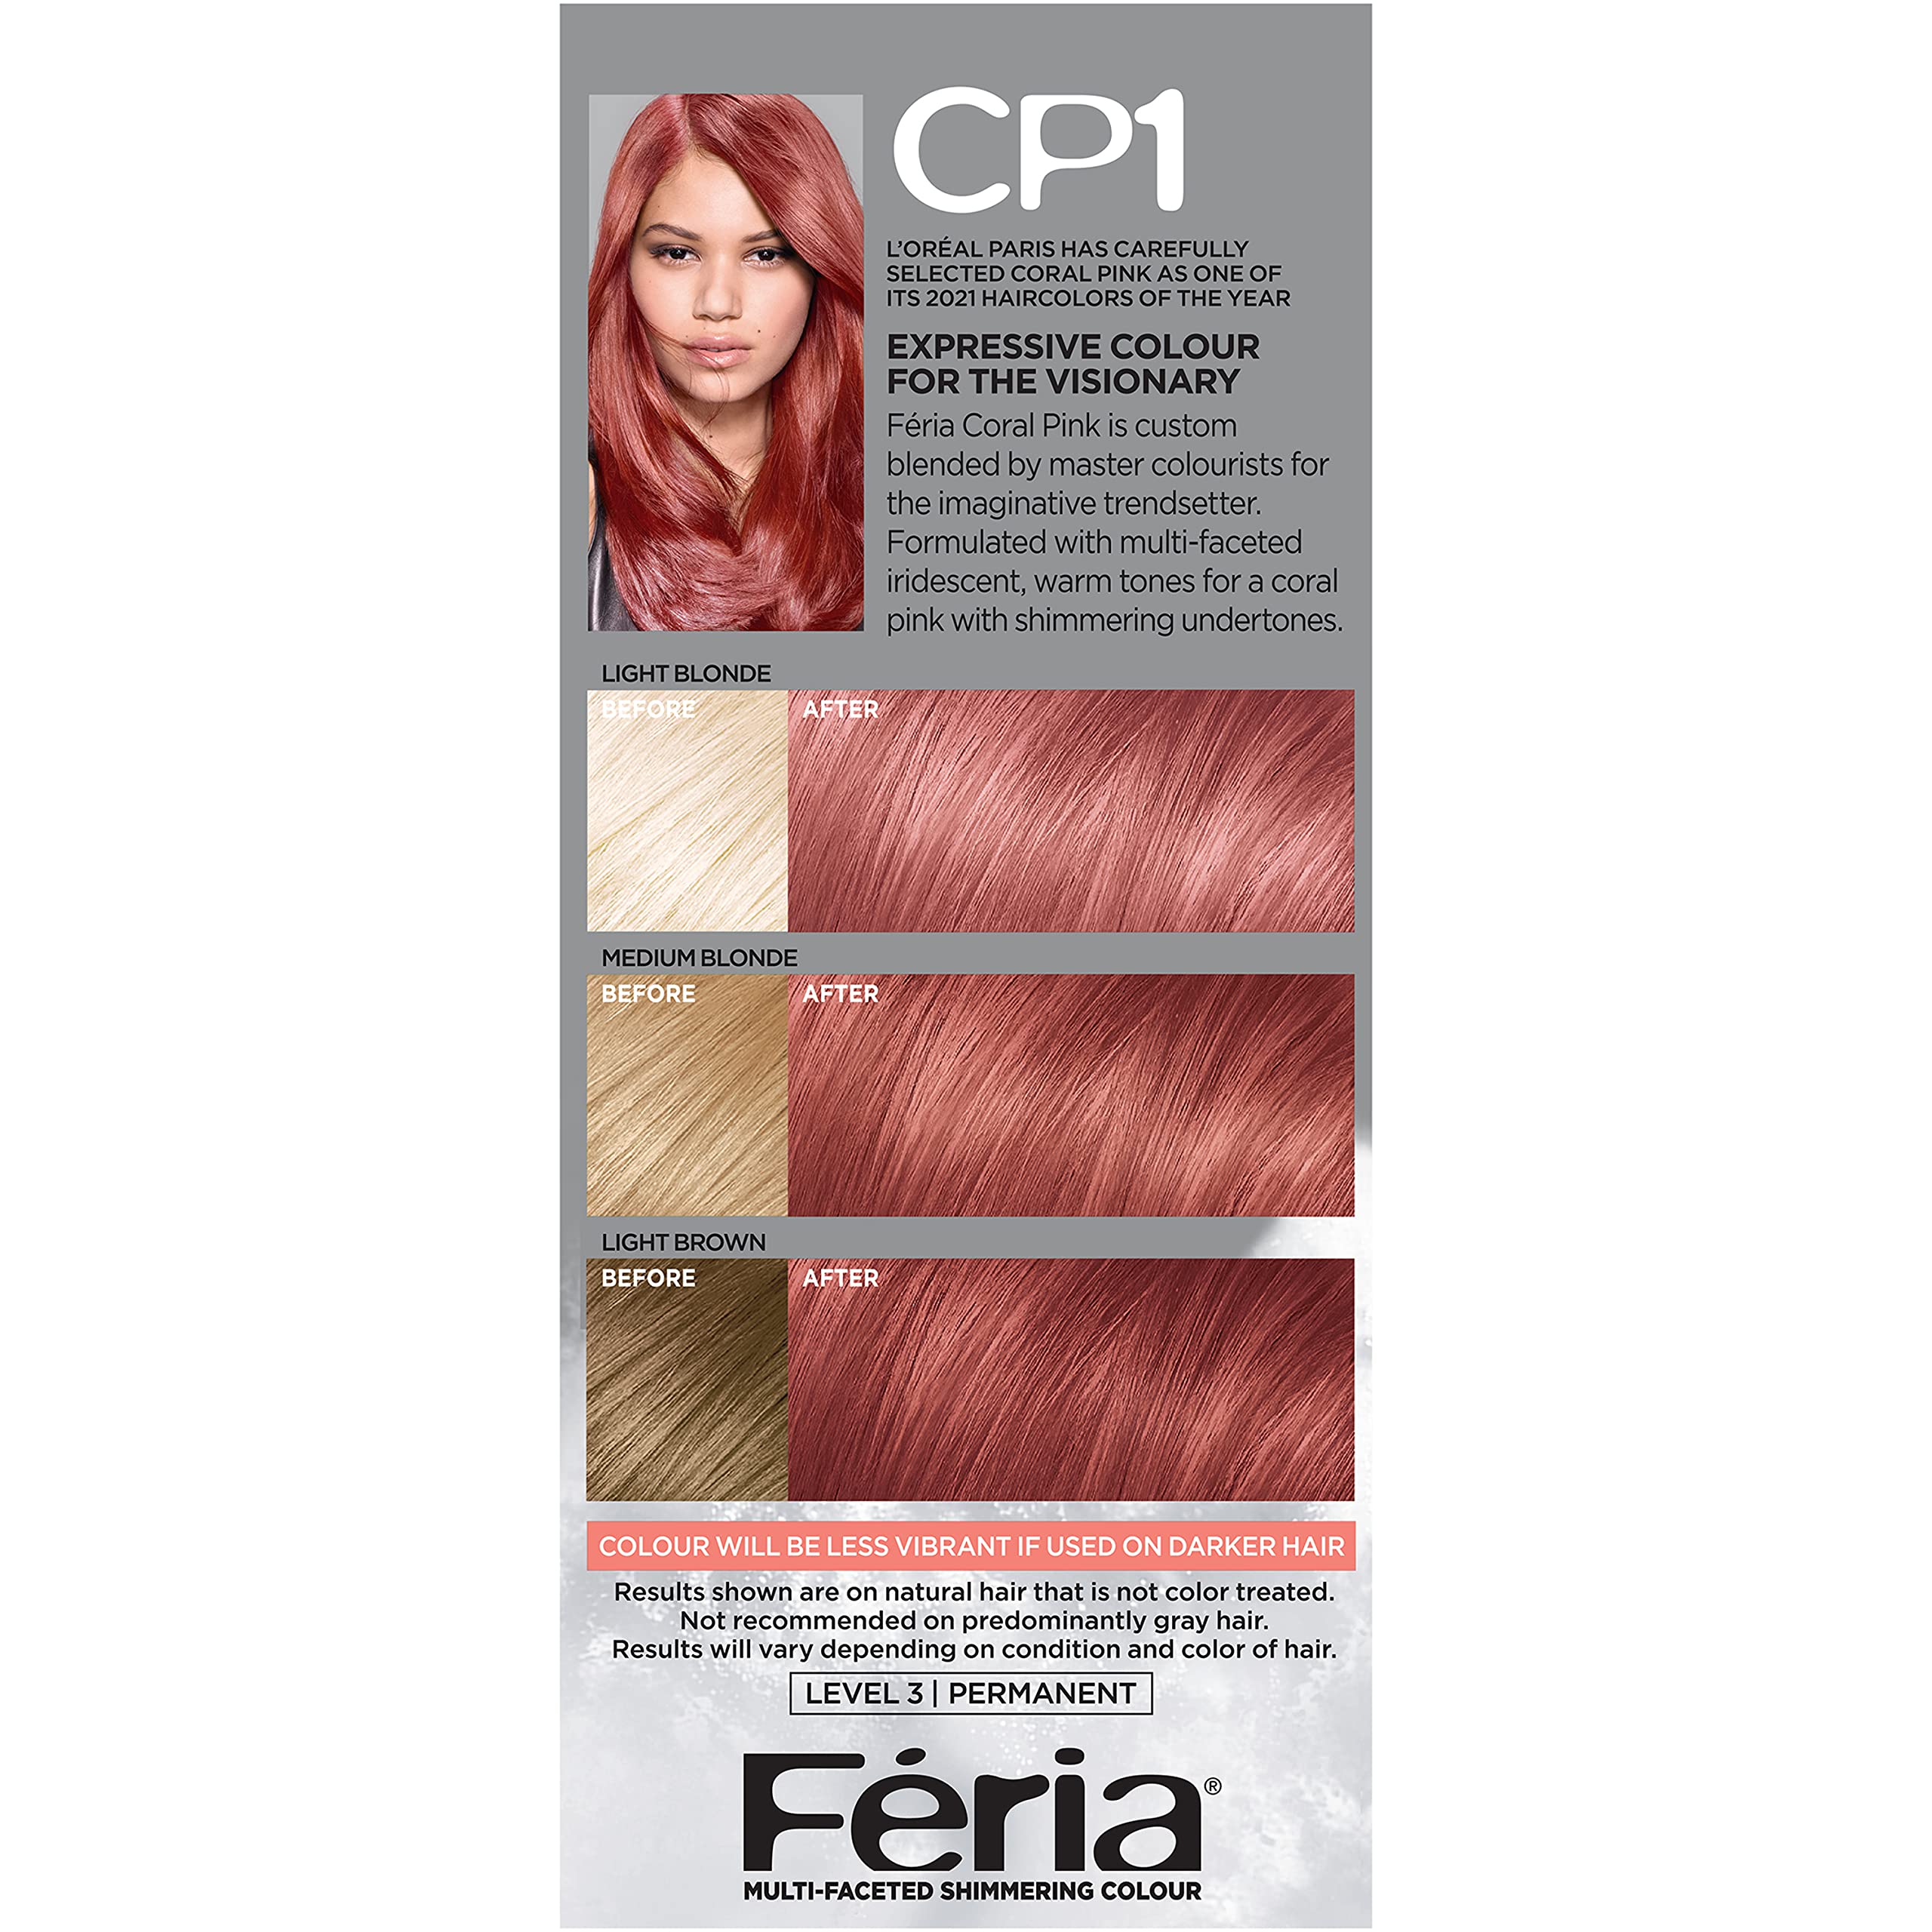 L'Oreal Paris Feria High Intensity Multi-Faceted Shimmering Permanent Hair Color, 3X Highlights, Gentle , Deep Conditioning Hair Dye